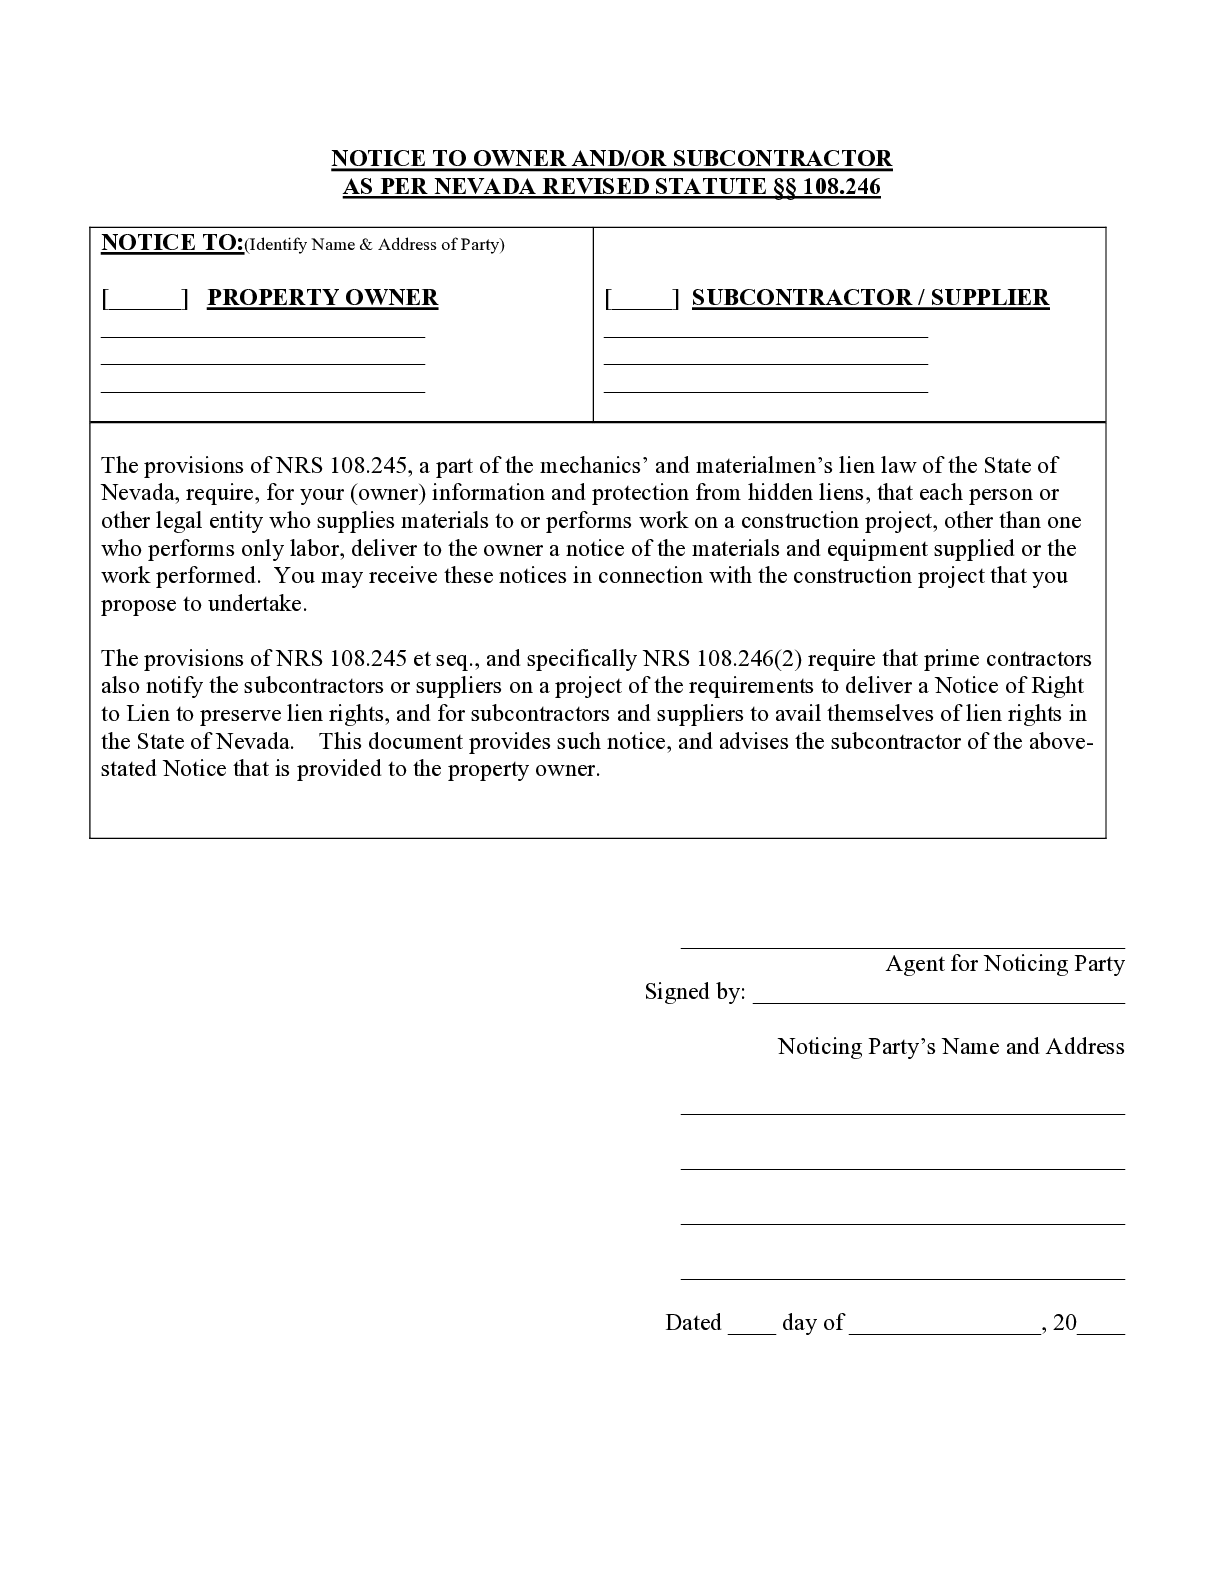 Nevada GC’s Notice to Owner/Subcontractors Form - free from